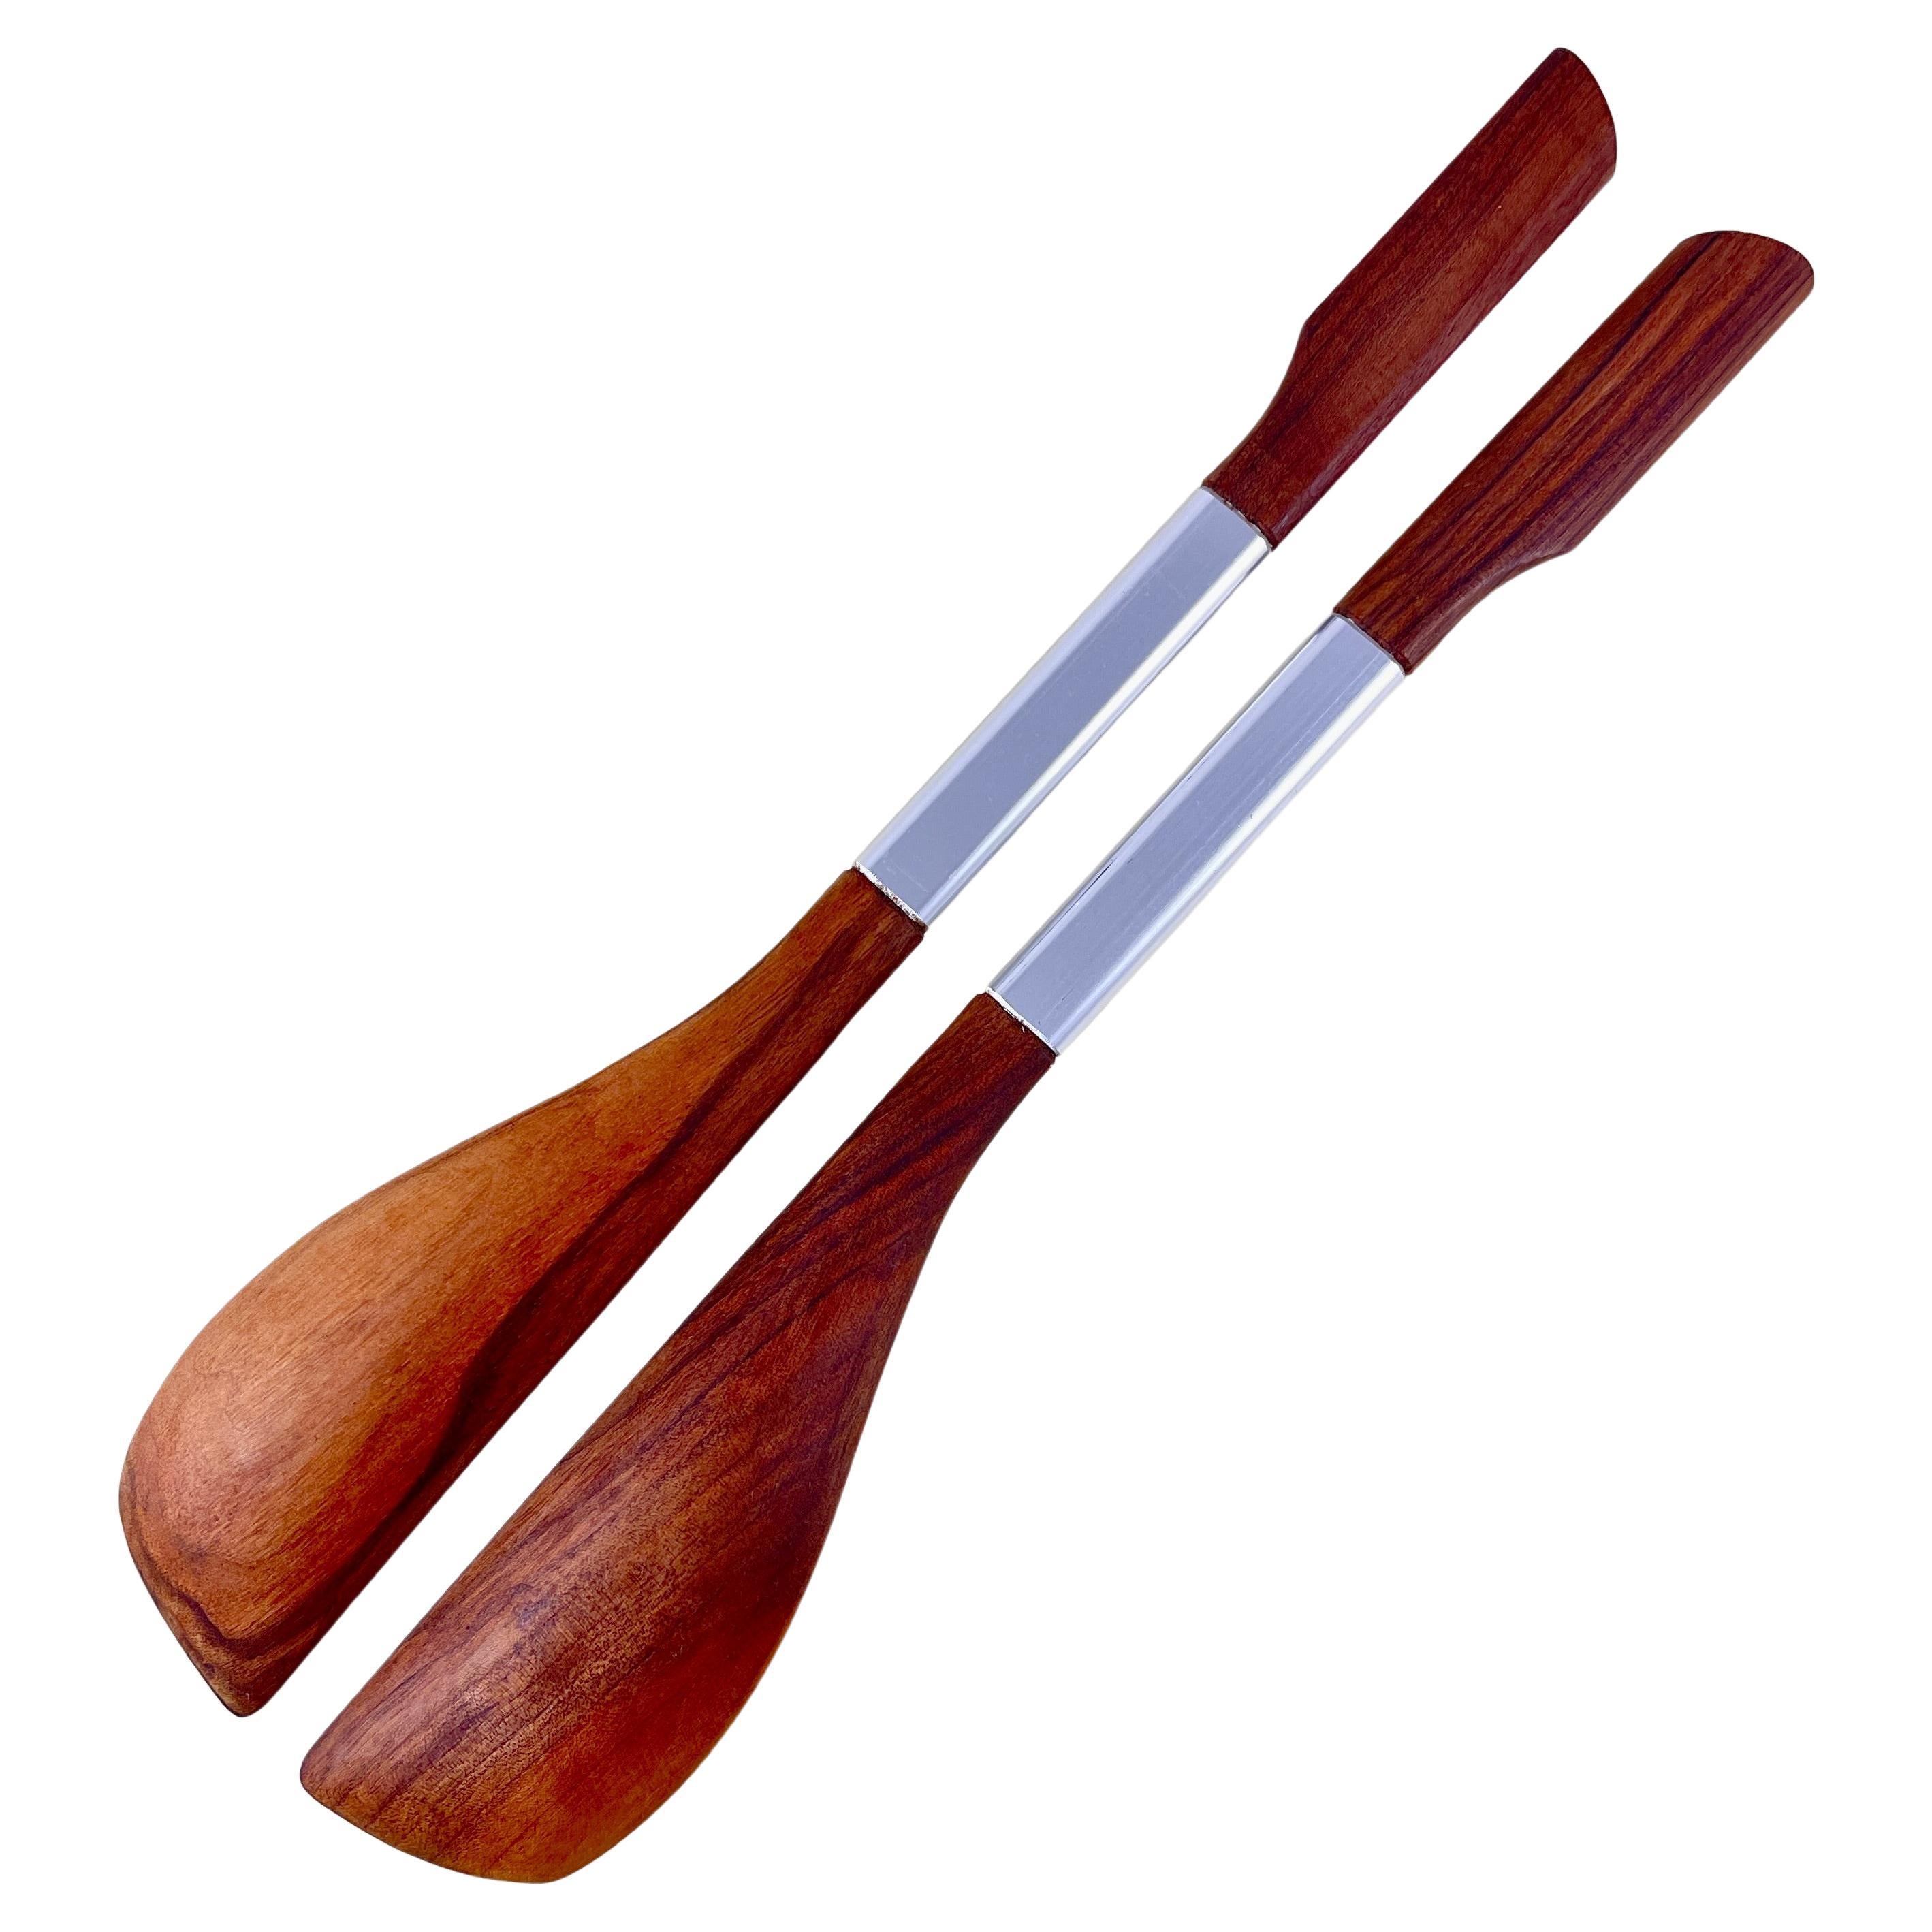 Hand-Crafted Danish Modern Teak Wood & Stainless Steel Banded Salad Servers, a Pair For Sale